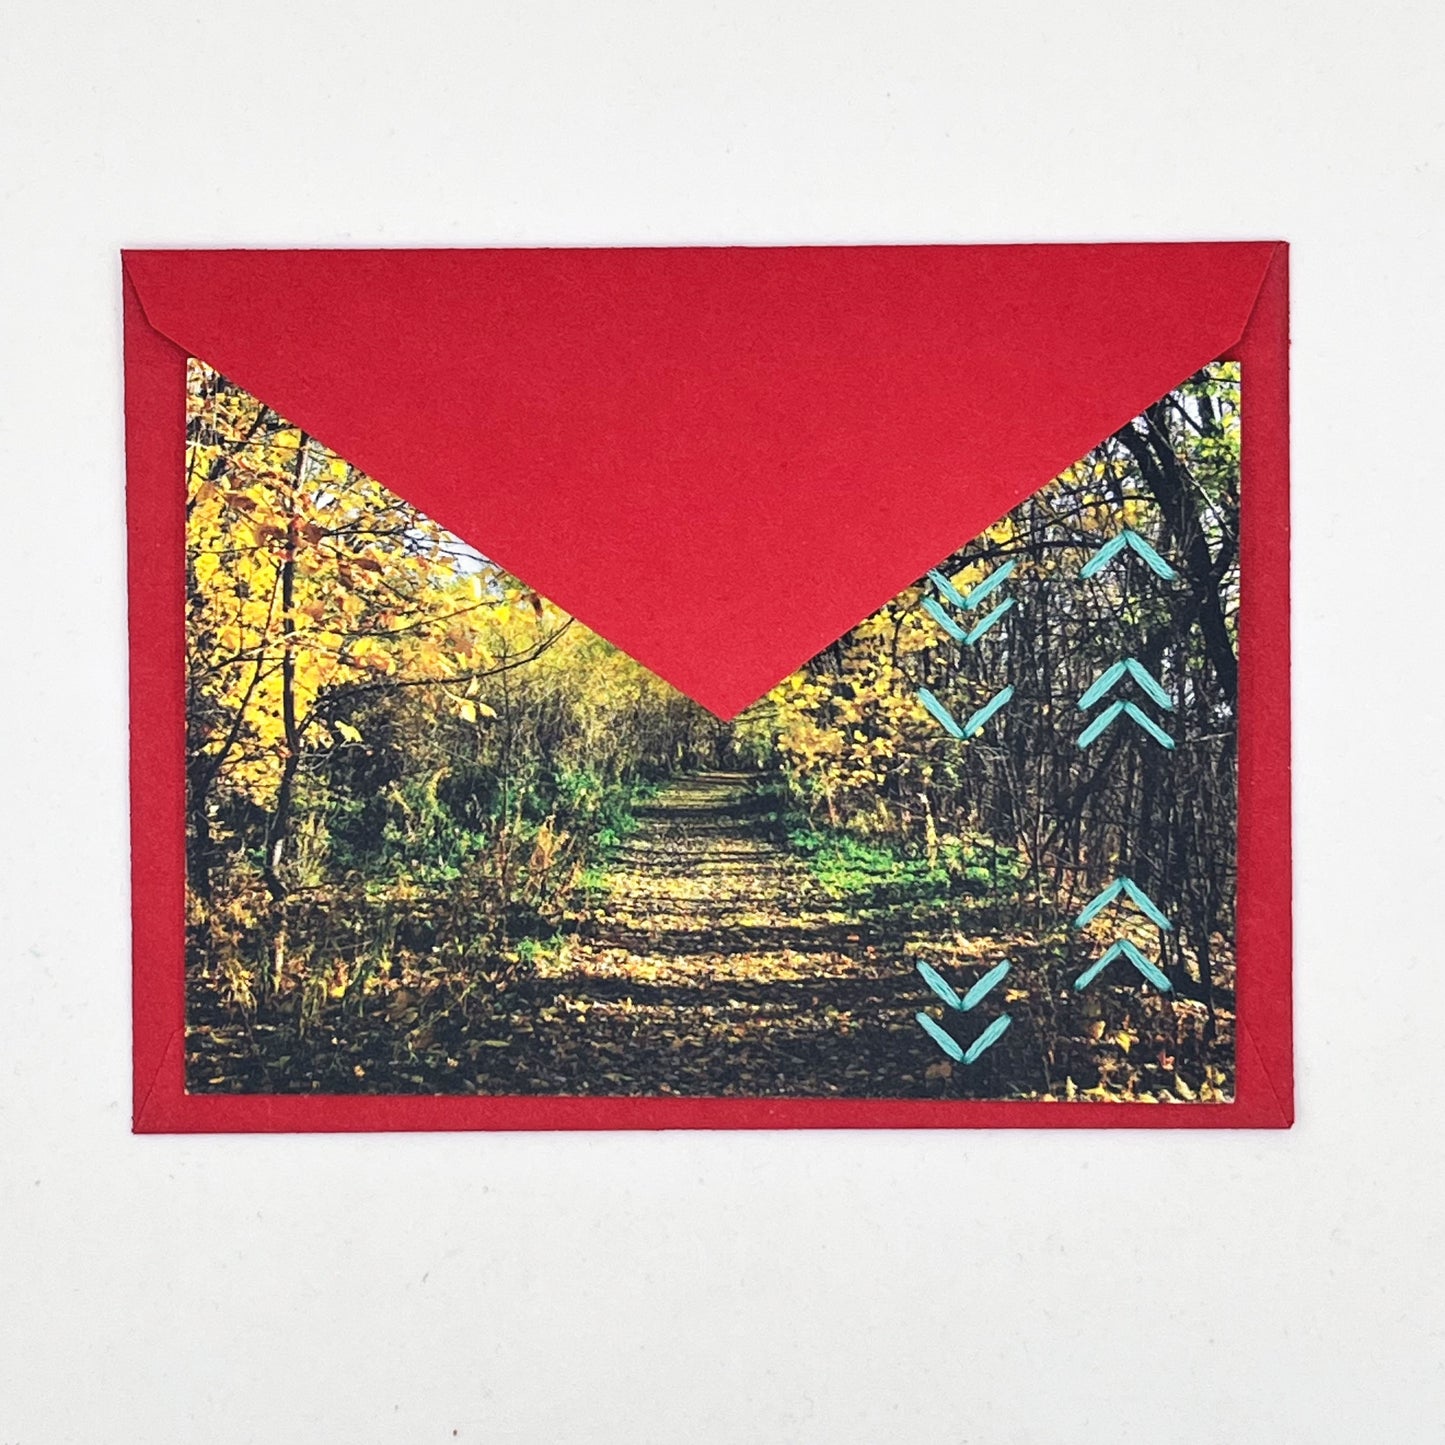 Greeting card flat on a red envelope, tucked under the flap. Photo of a path through the woods in fall. Rows of aqua chevron stitches along right side card